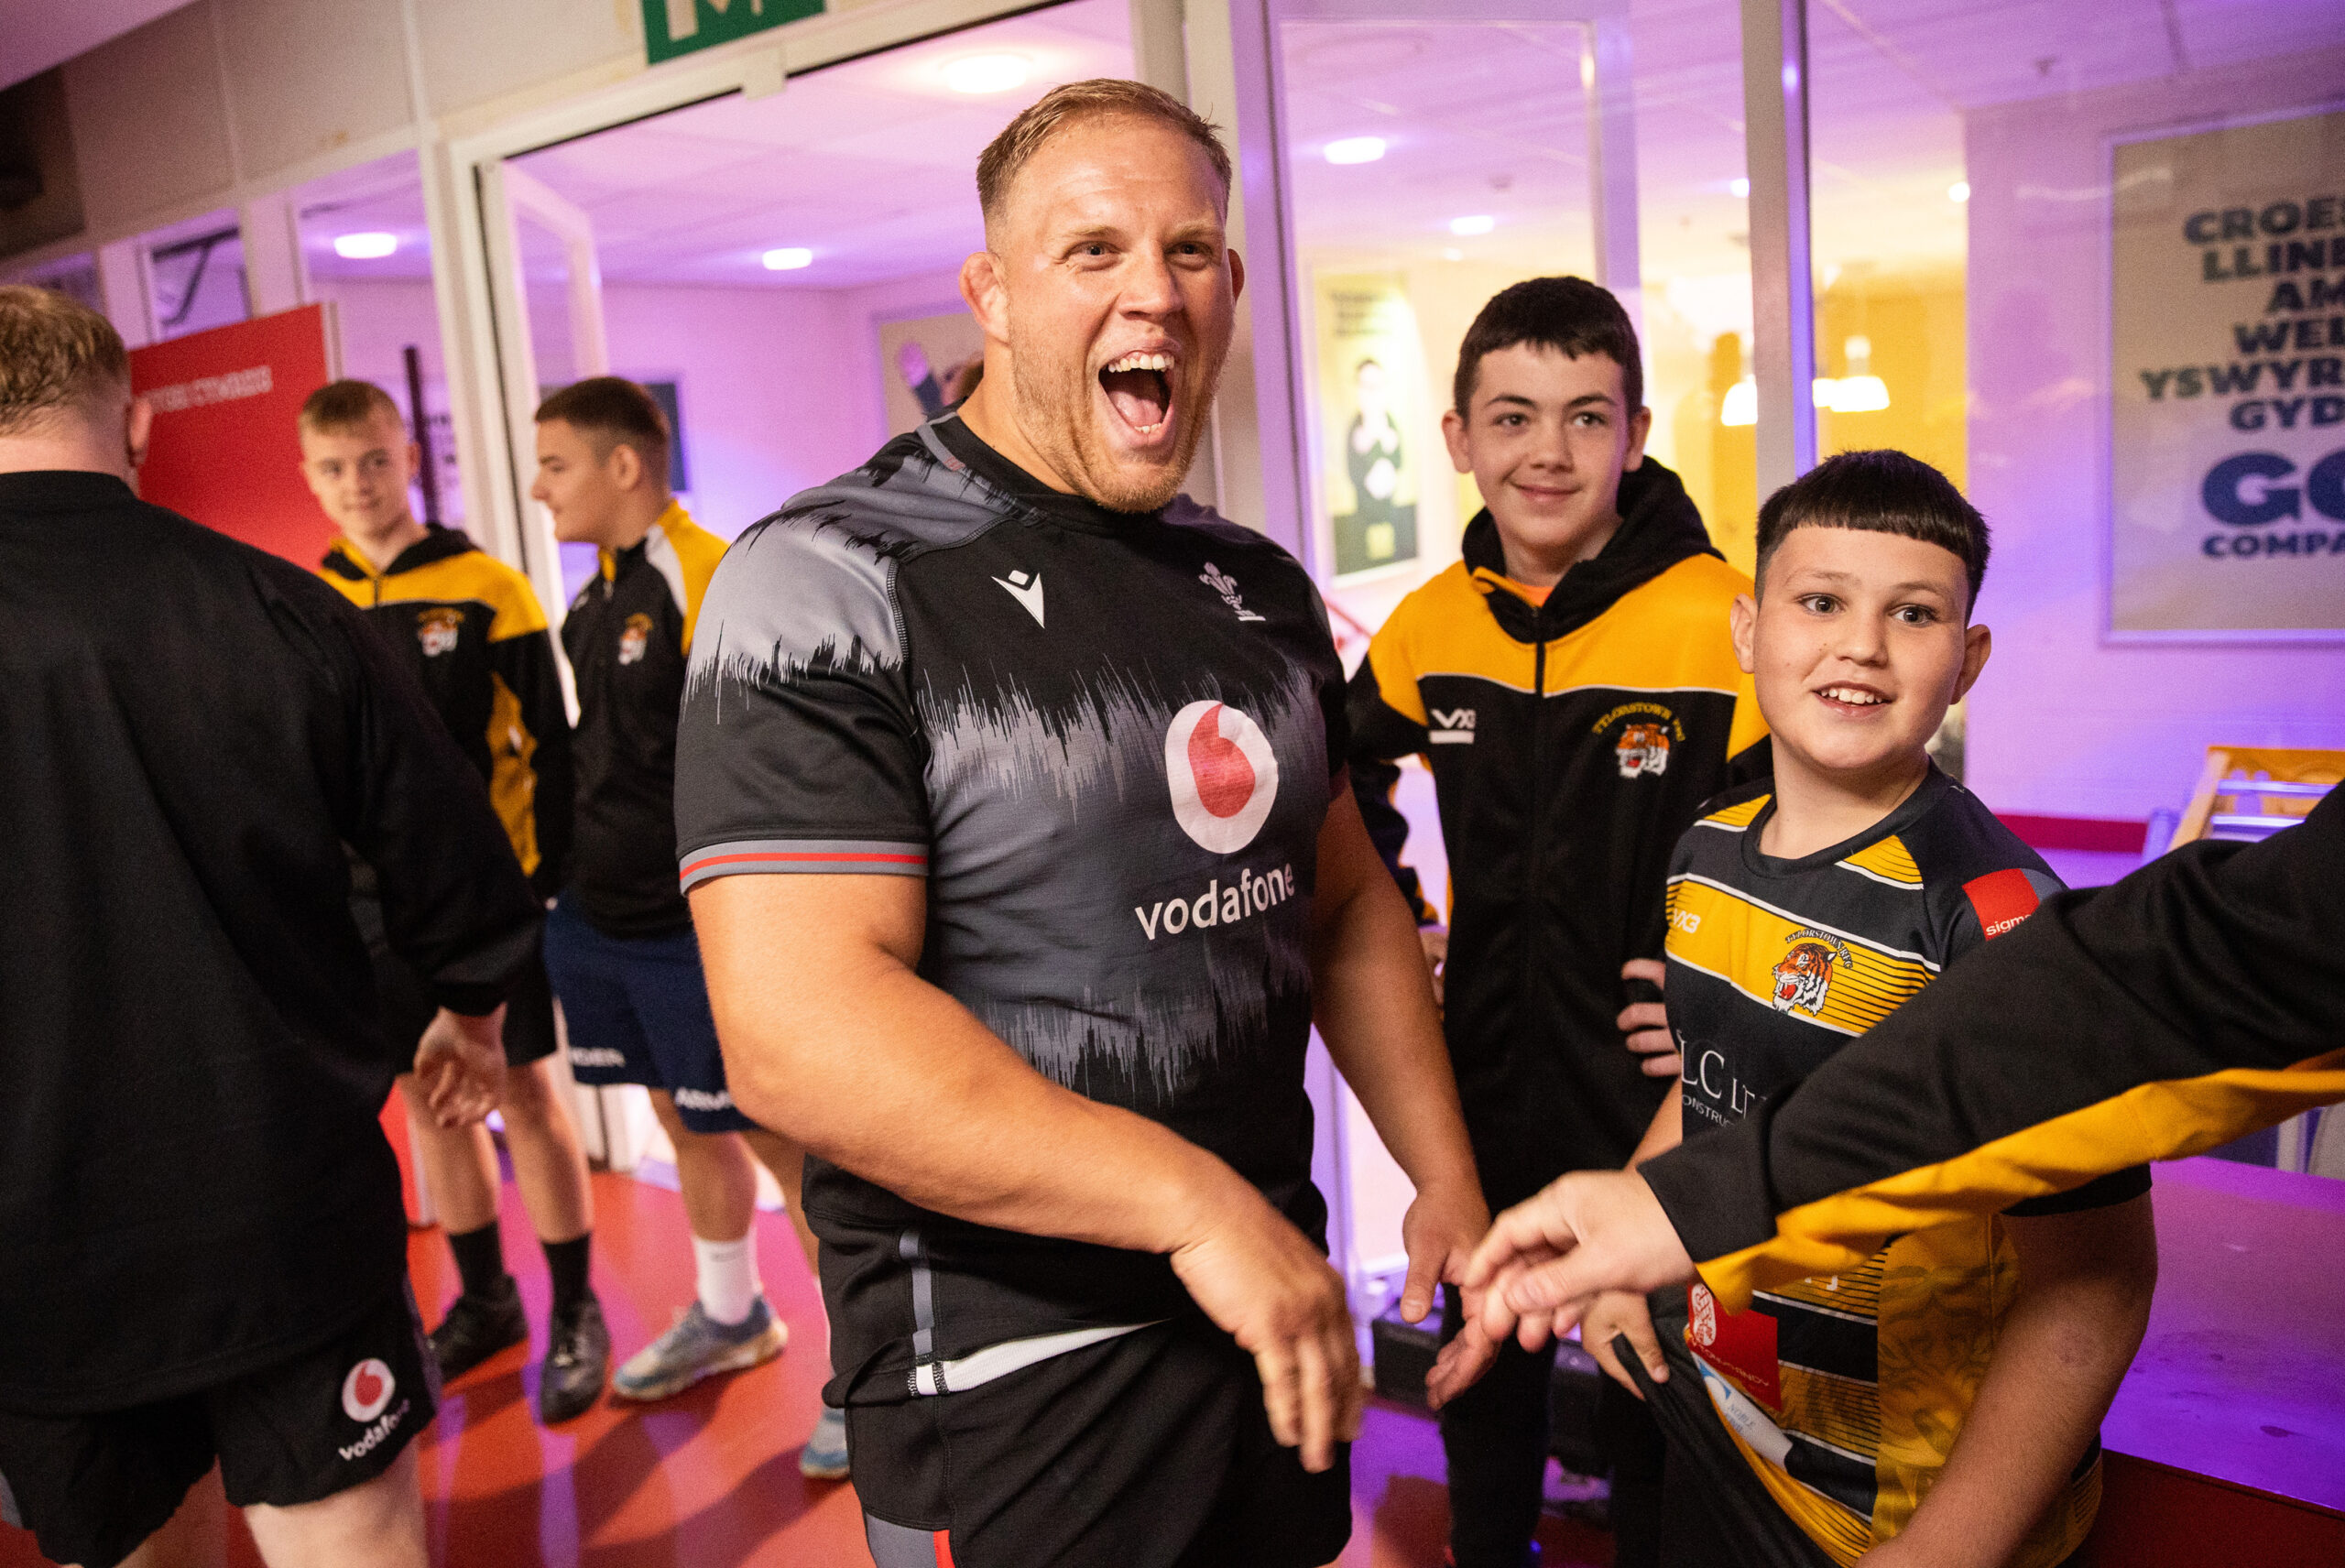 Sported and Vodafone give local grassroots rugby player the chance to join his heroes on the pitch